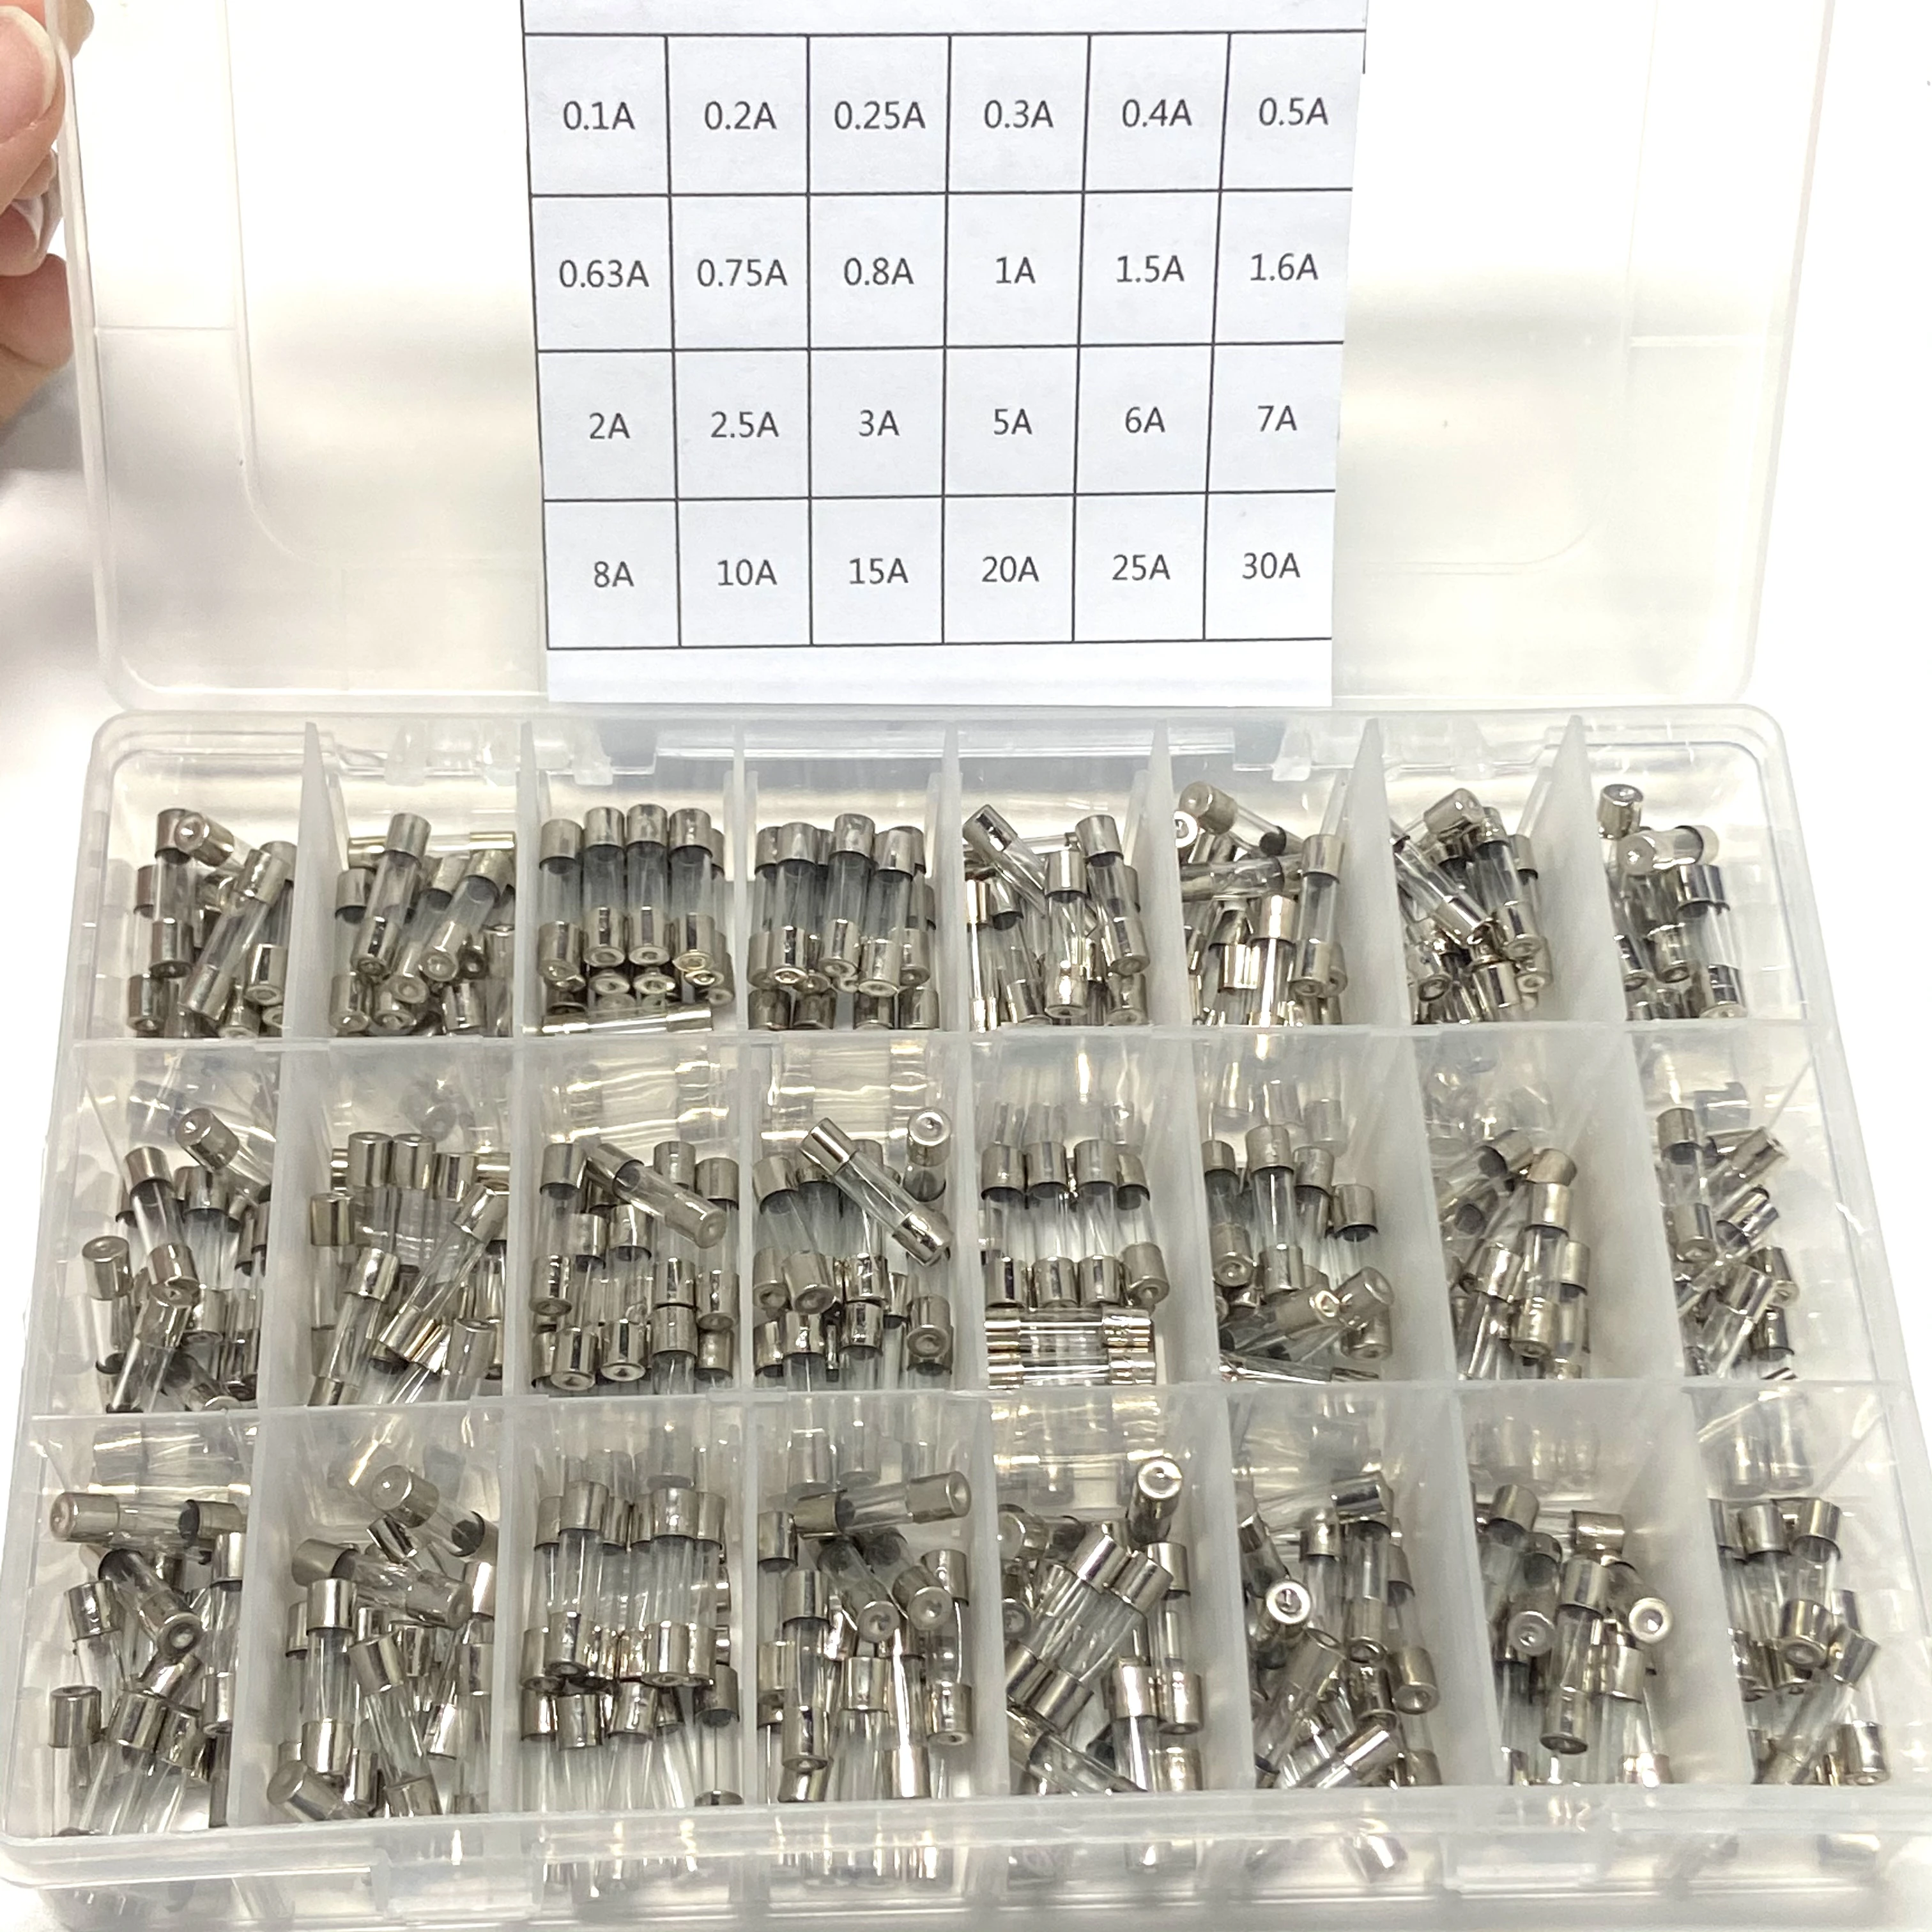 360Pcs 5x20mm Glass Tube Fuse Quick Blow Glass Tube Fuse Assorted Kits Fast-blow Glass Fuses 0.1A-30A 24values 20pcs glass tube fuse 5x20mm 5a 6a 6 3a 7a 8a 10a 12a 15a 20a 30a 250v fast blow fuses fusibles